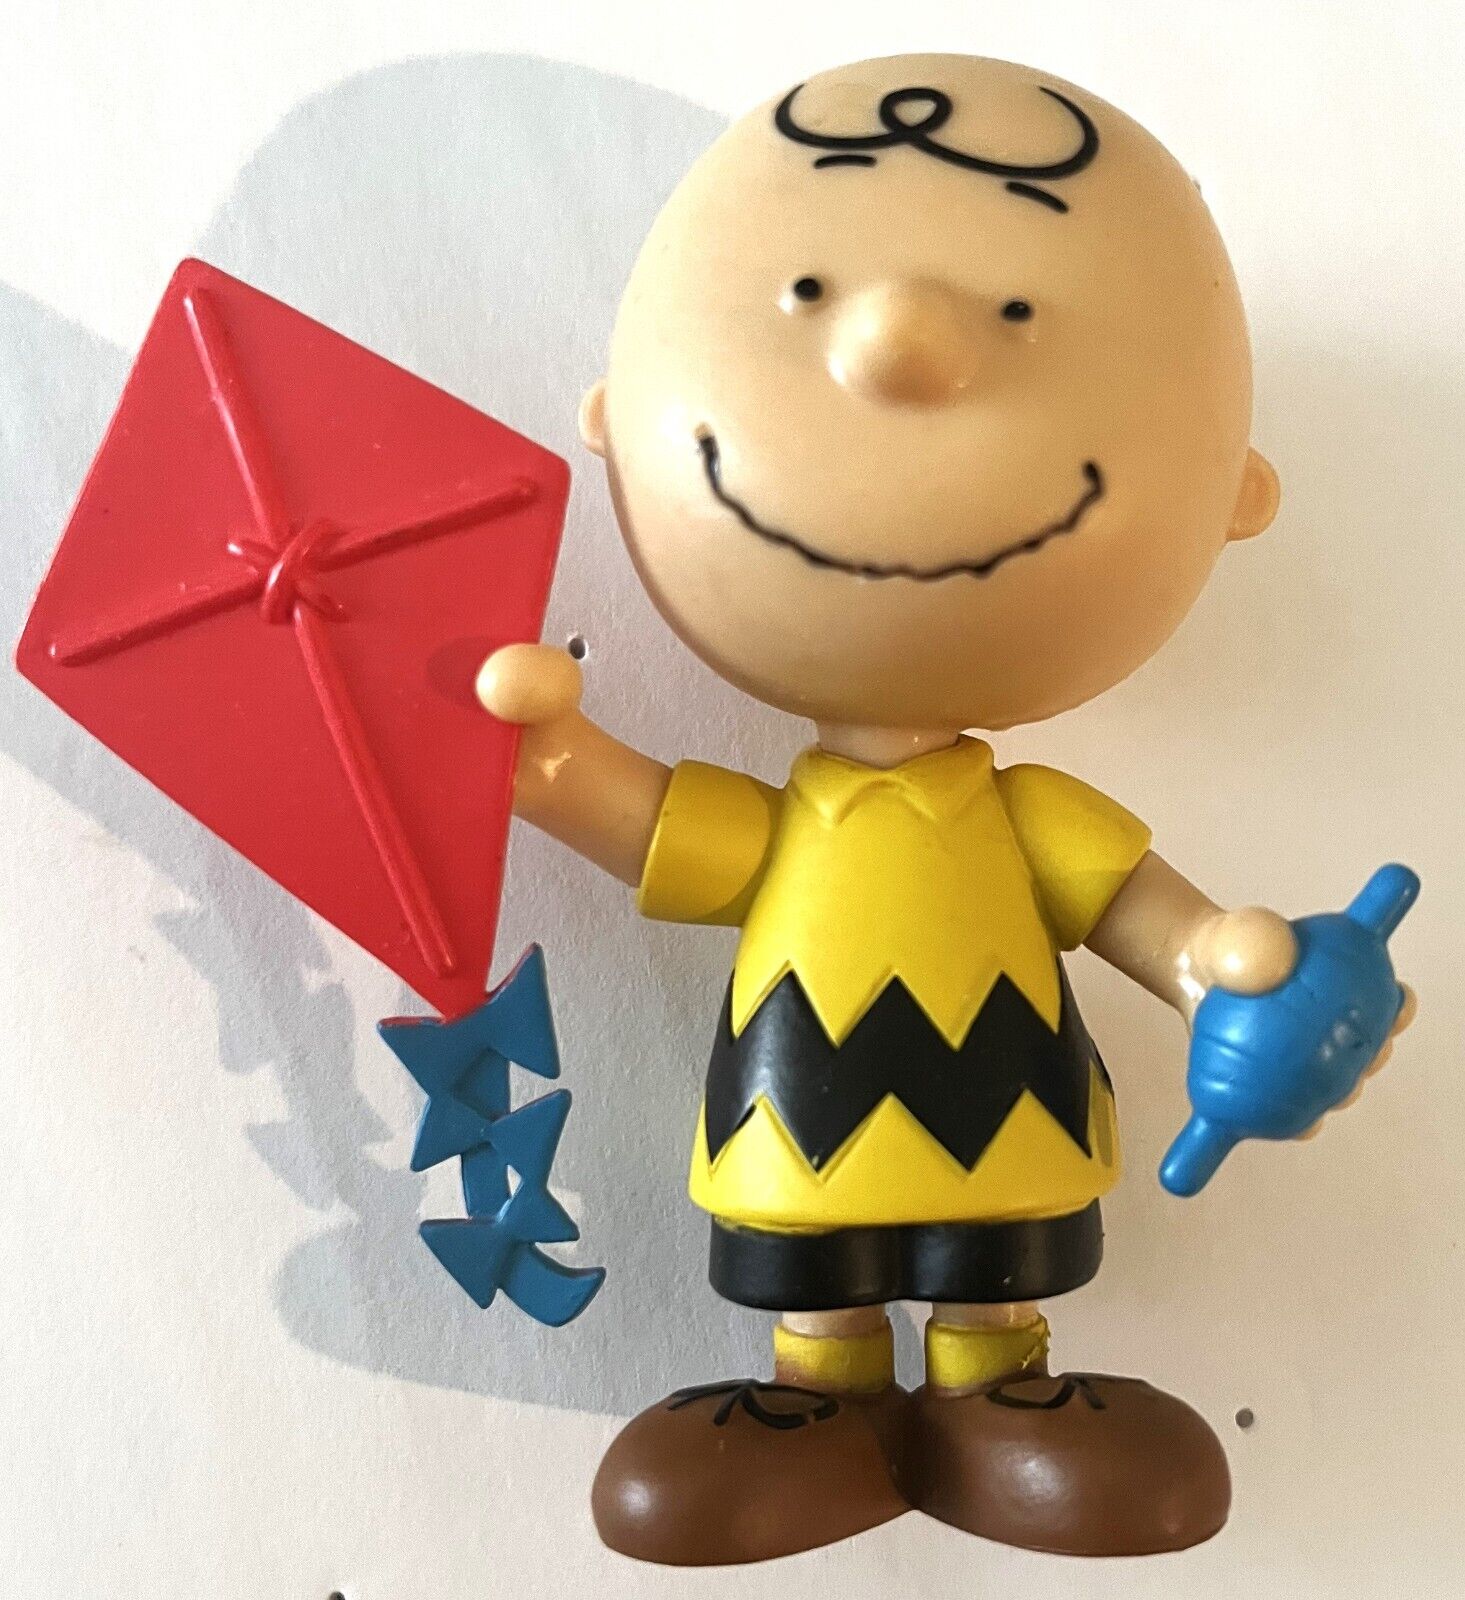 Collectible Peanuts Charlie Brown Action Figure with Kite